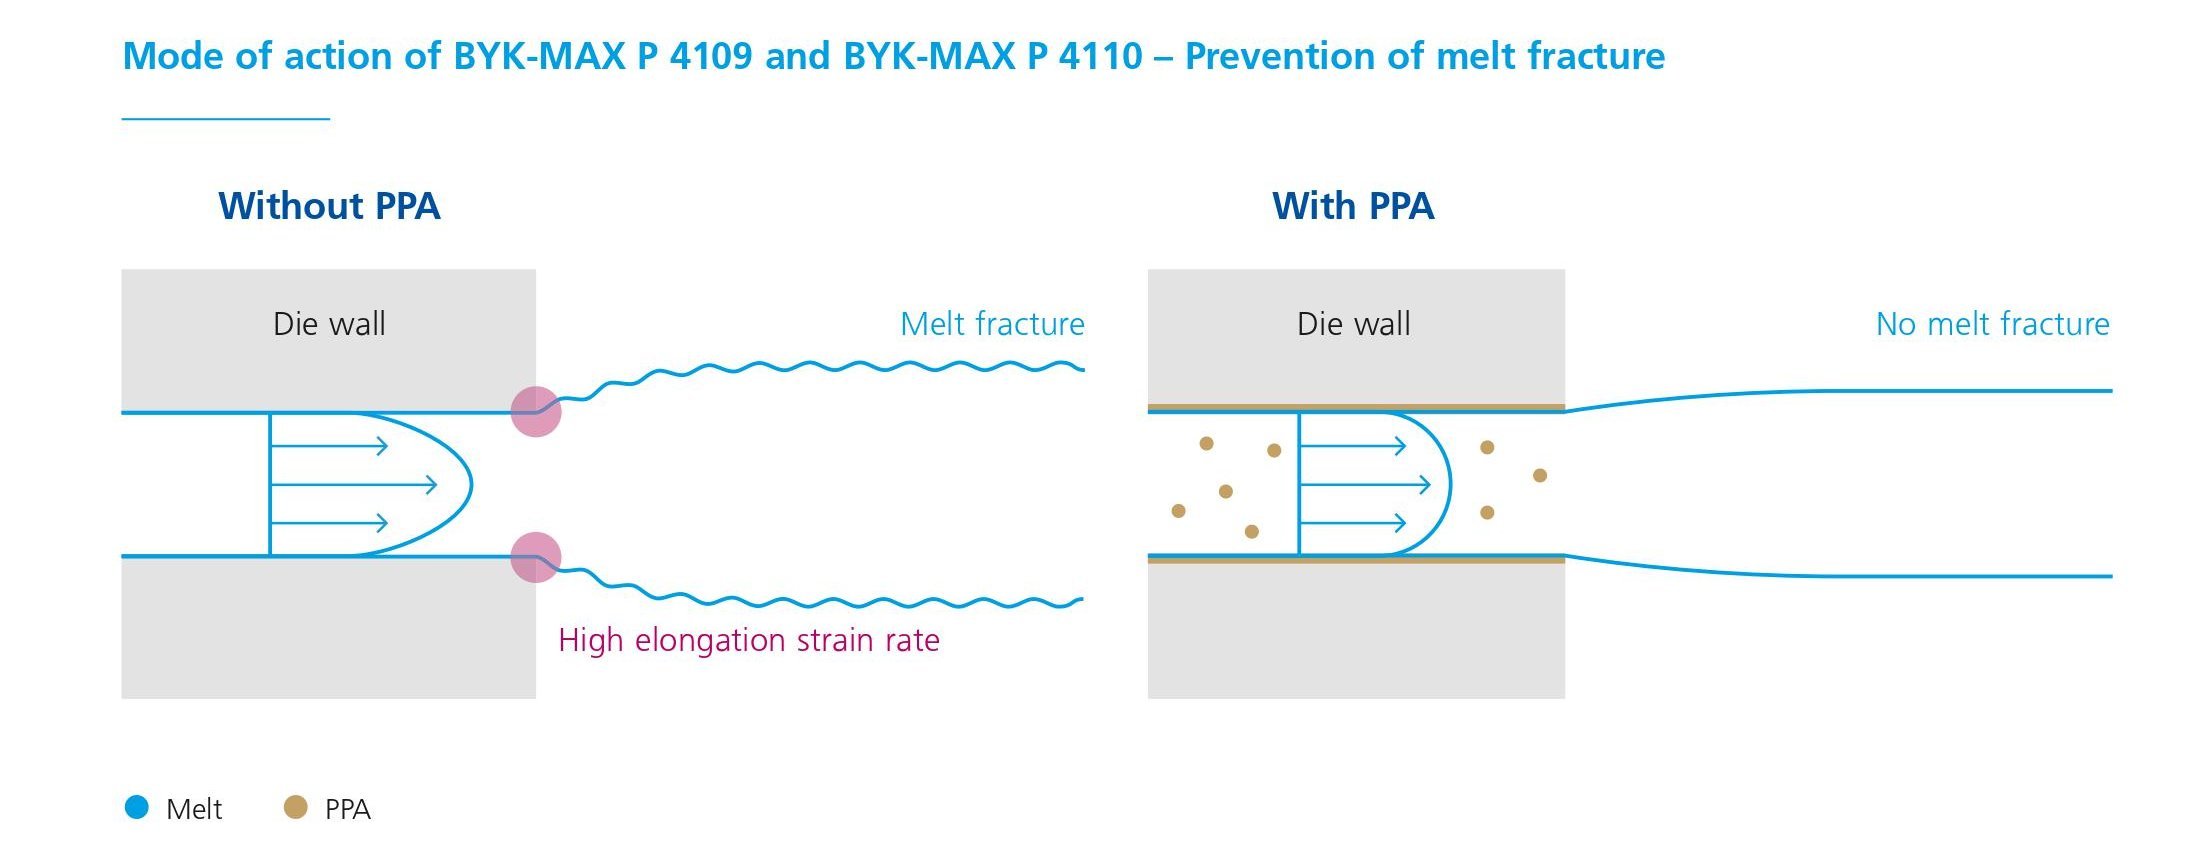 Mode of action of BYK-MAX P 4109 and BYK-MAX P 4110